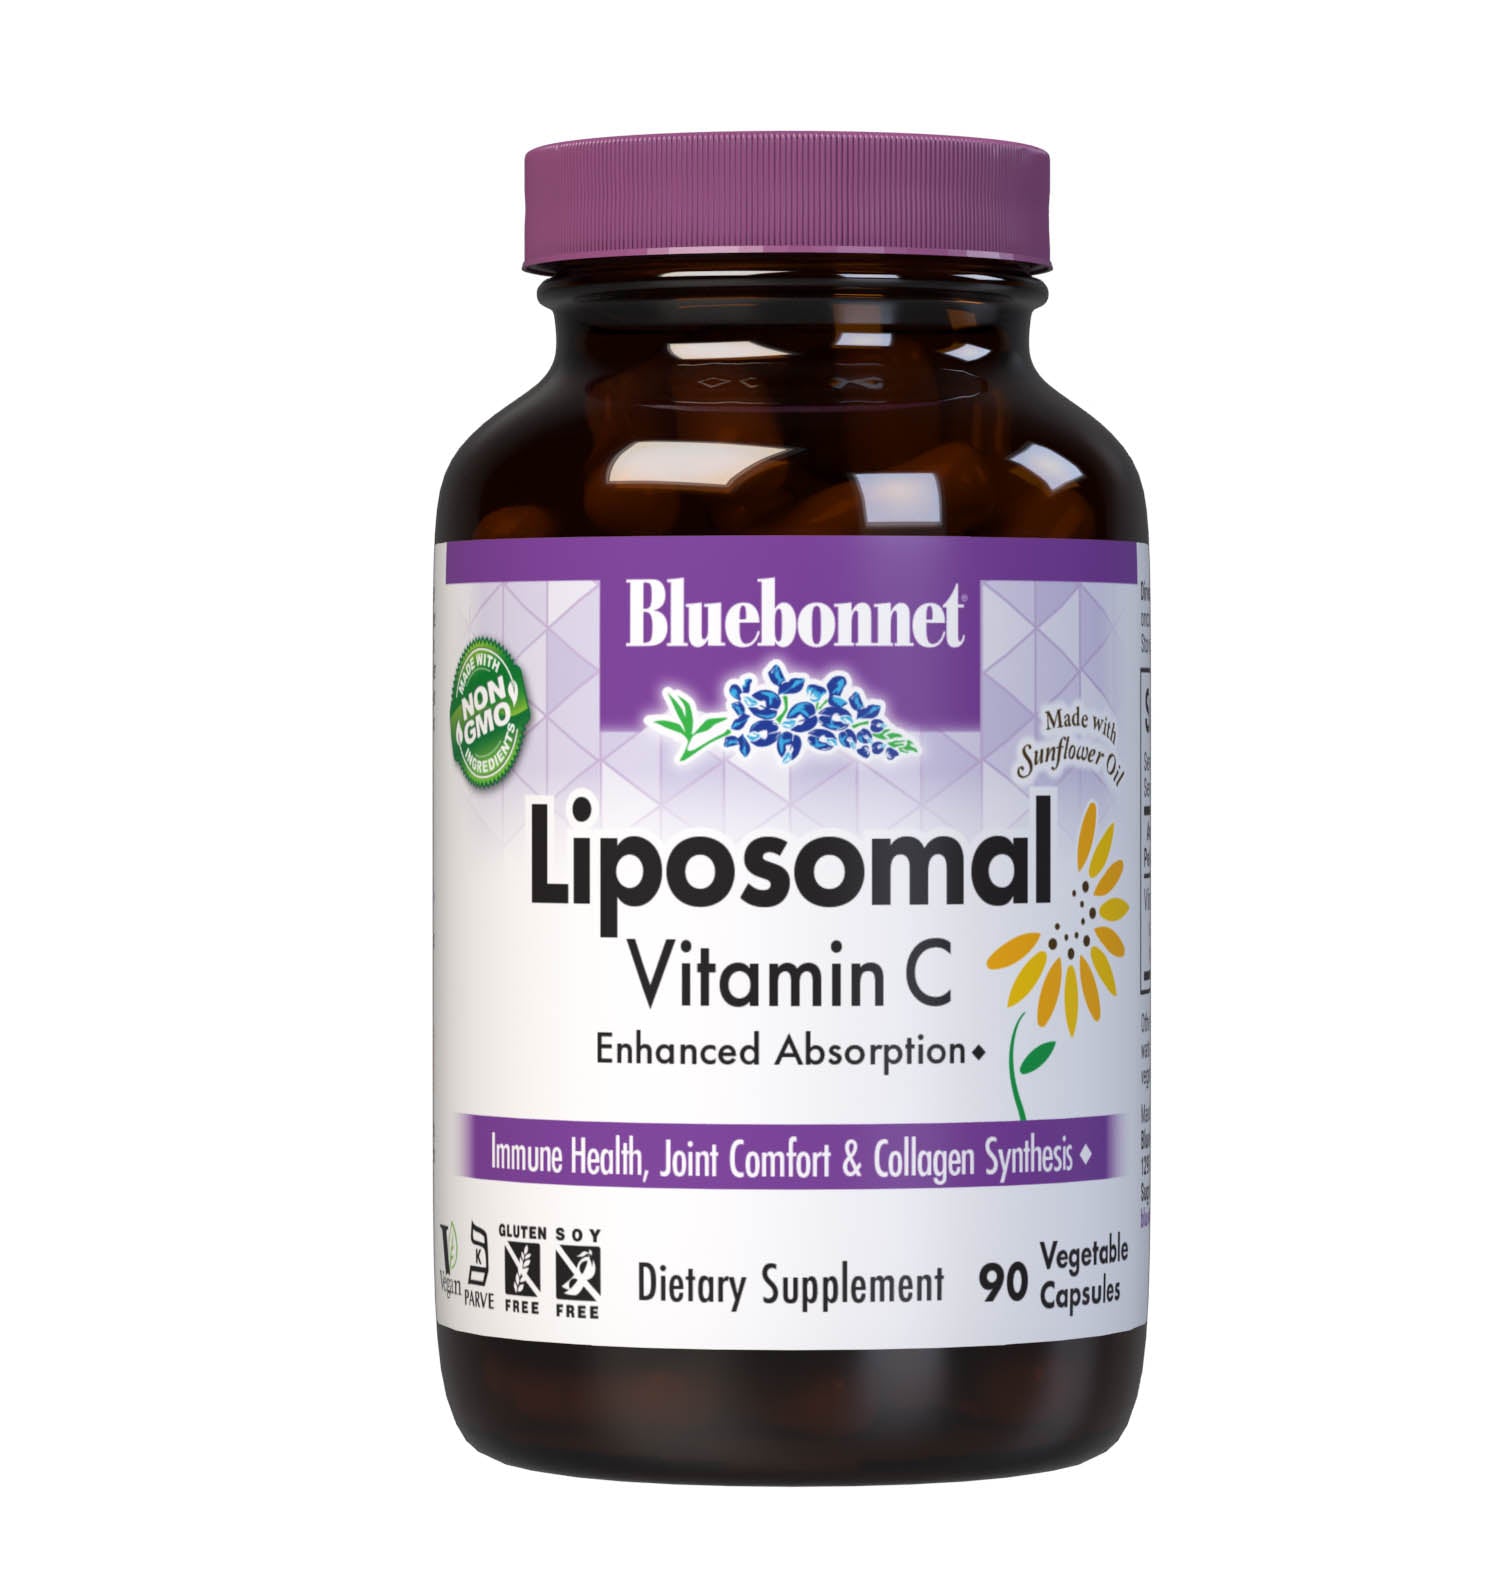 Formulated with Liposomal Pureway-C, 90 Vegetable Capsules a patented and clinically tested form of vitamin C that fuses ascorbic acid and citrus bioflavonoids to lipid metabolites such as fatty acids, esters, and fatty alcohols for better delivery, absorption and uptake to help support immune health, joint comfort & collagen synthesis. #size_90 count